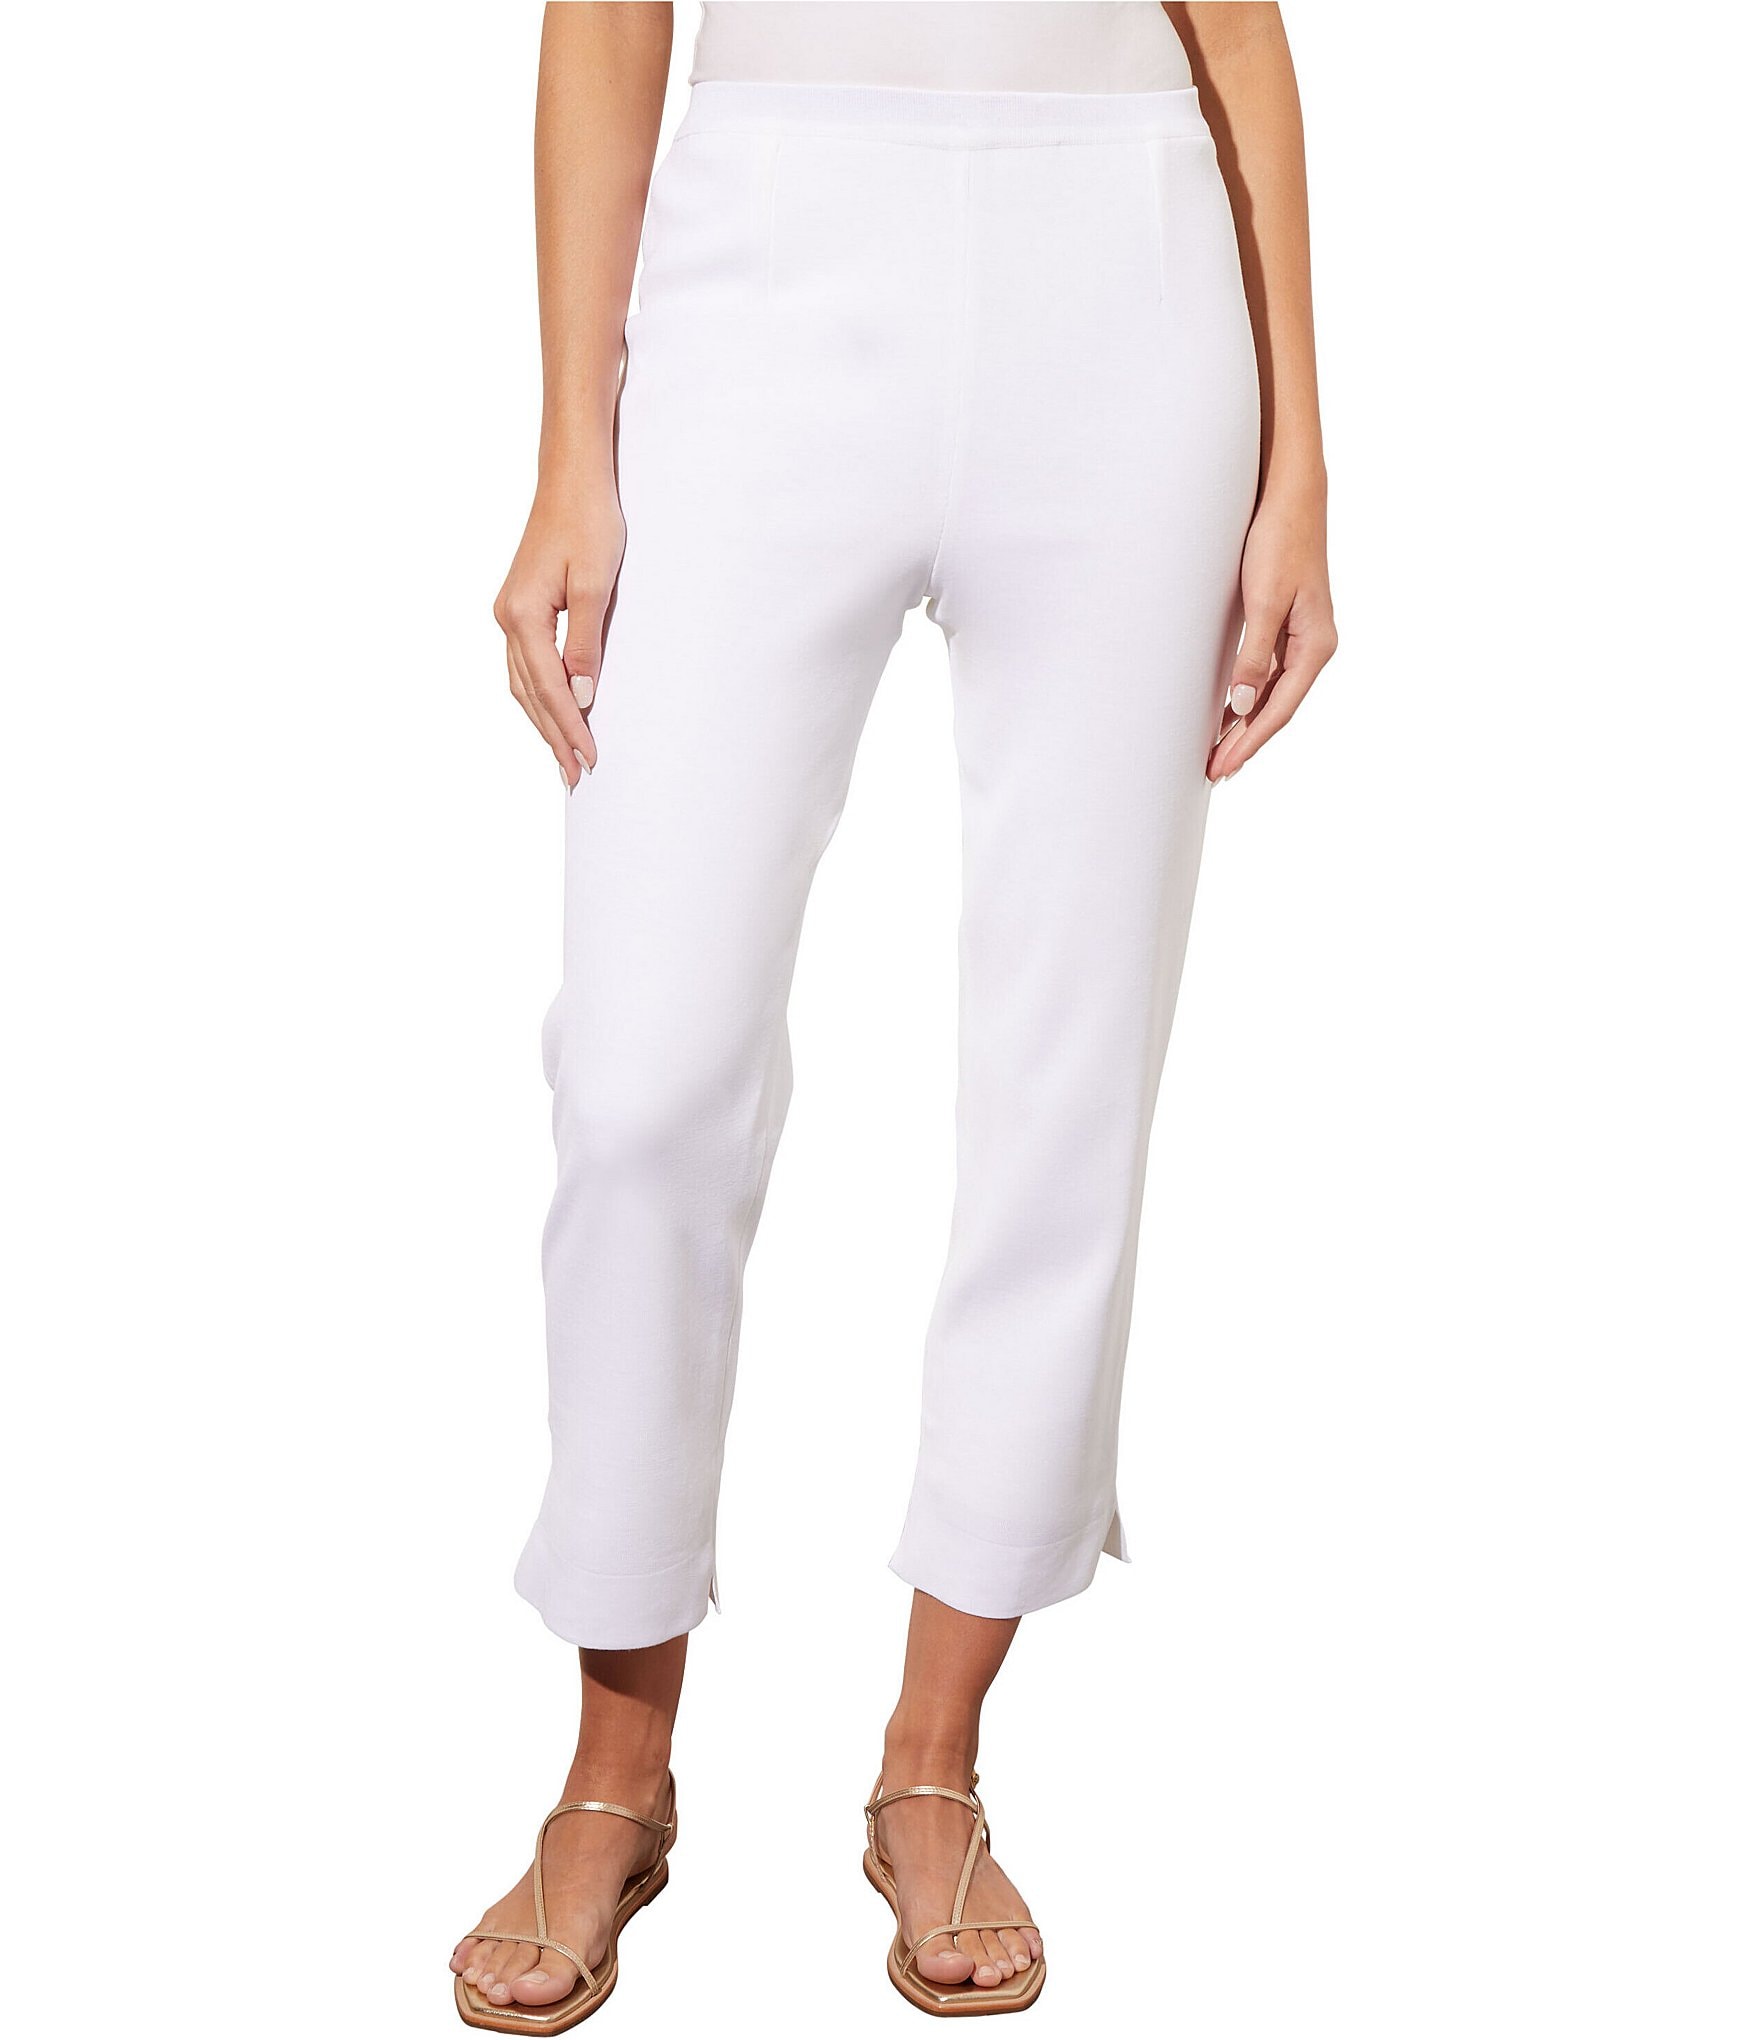 lined pants: Women's Clothing